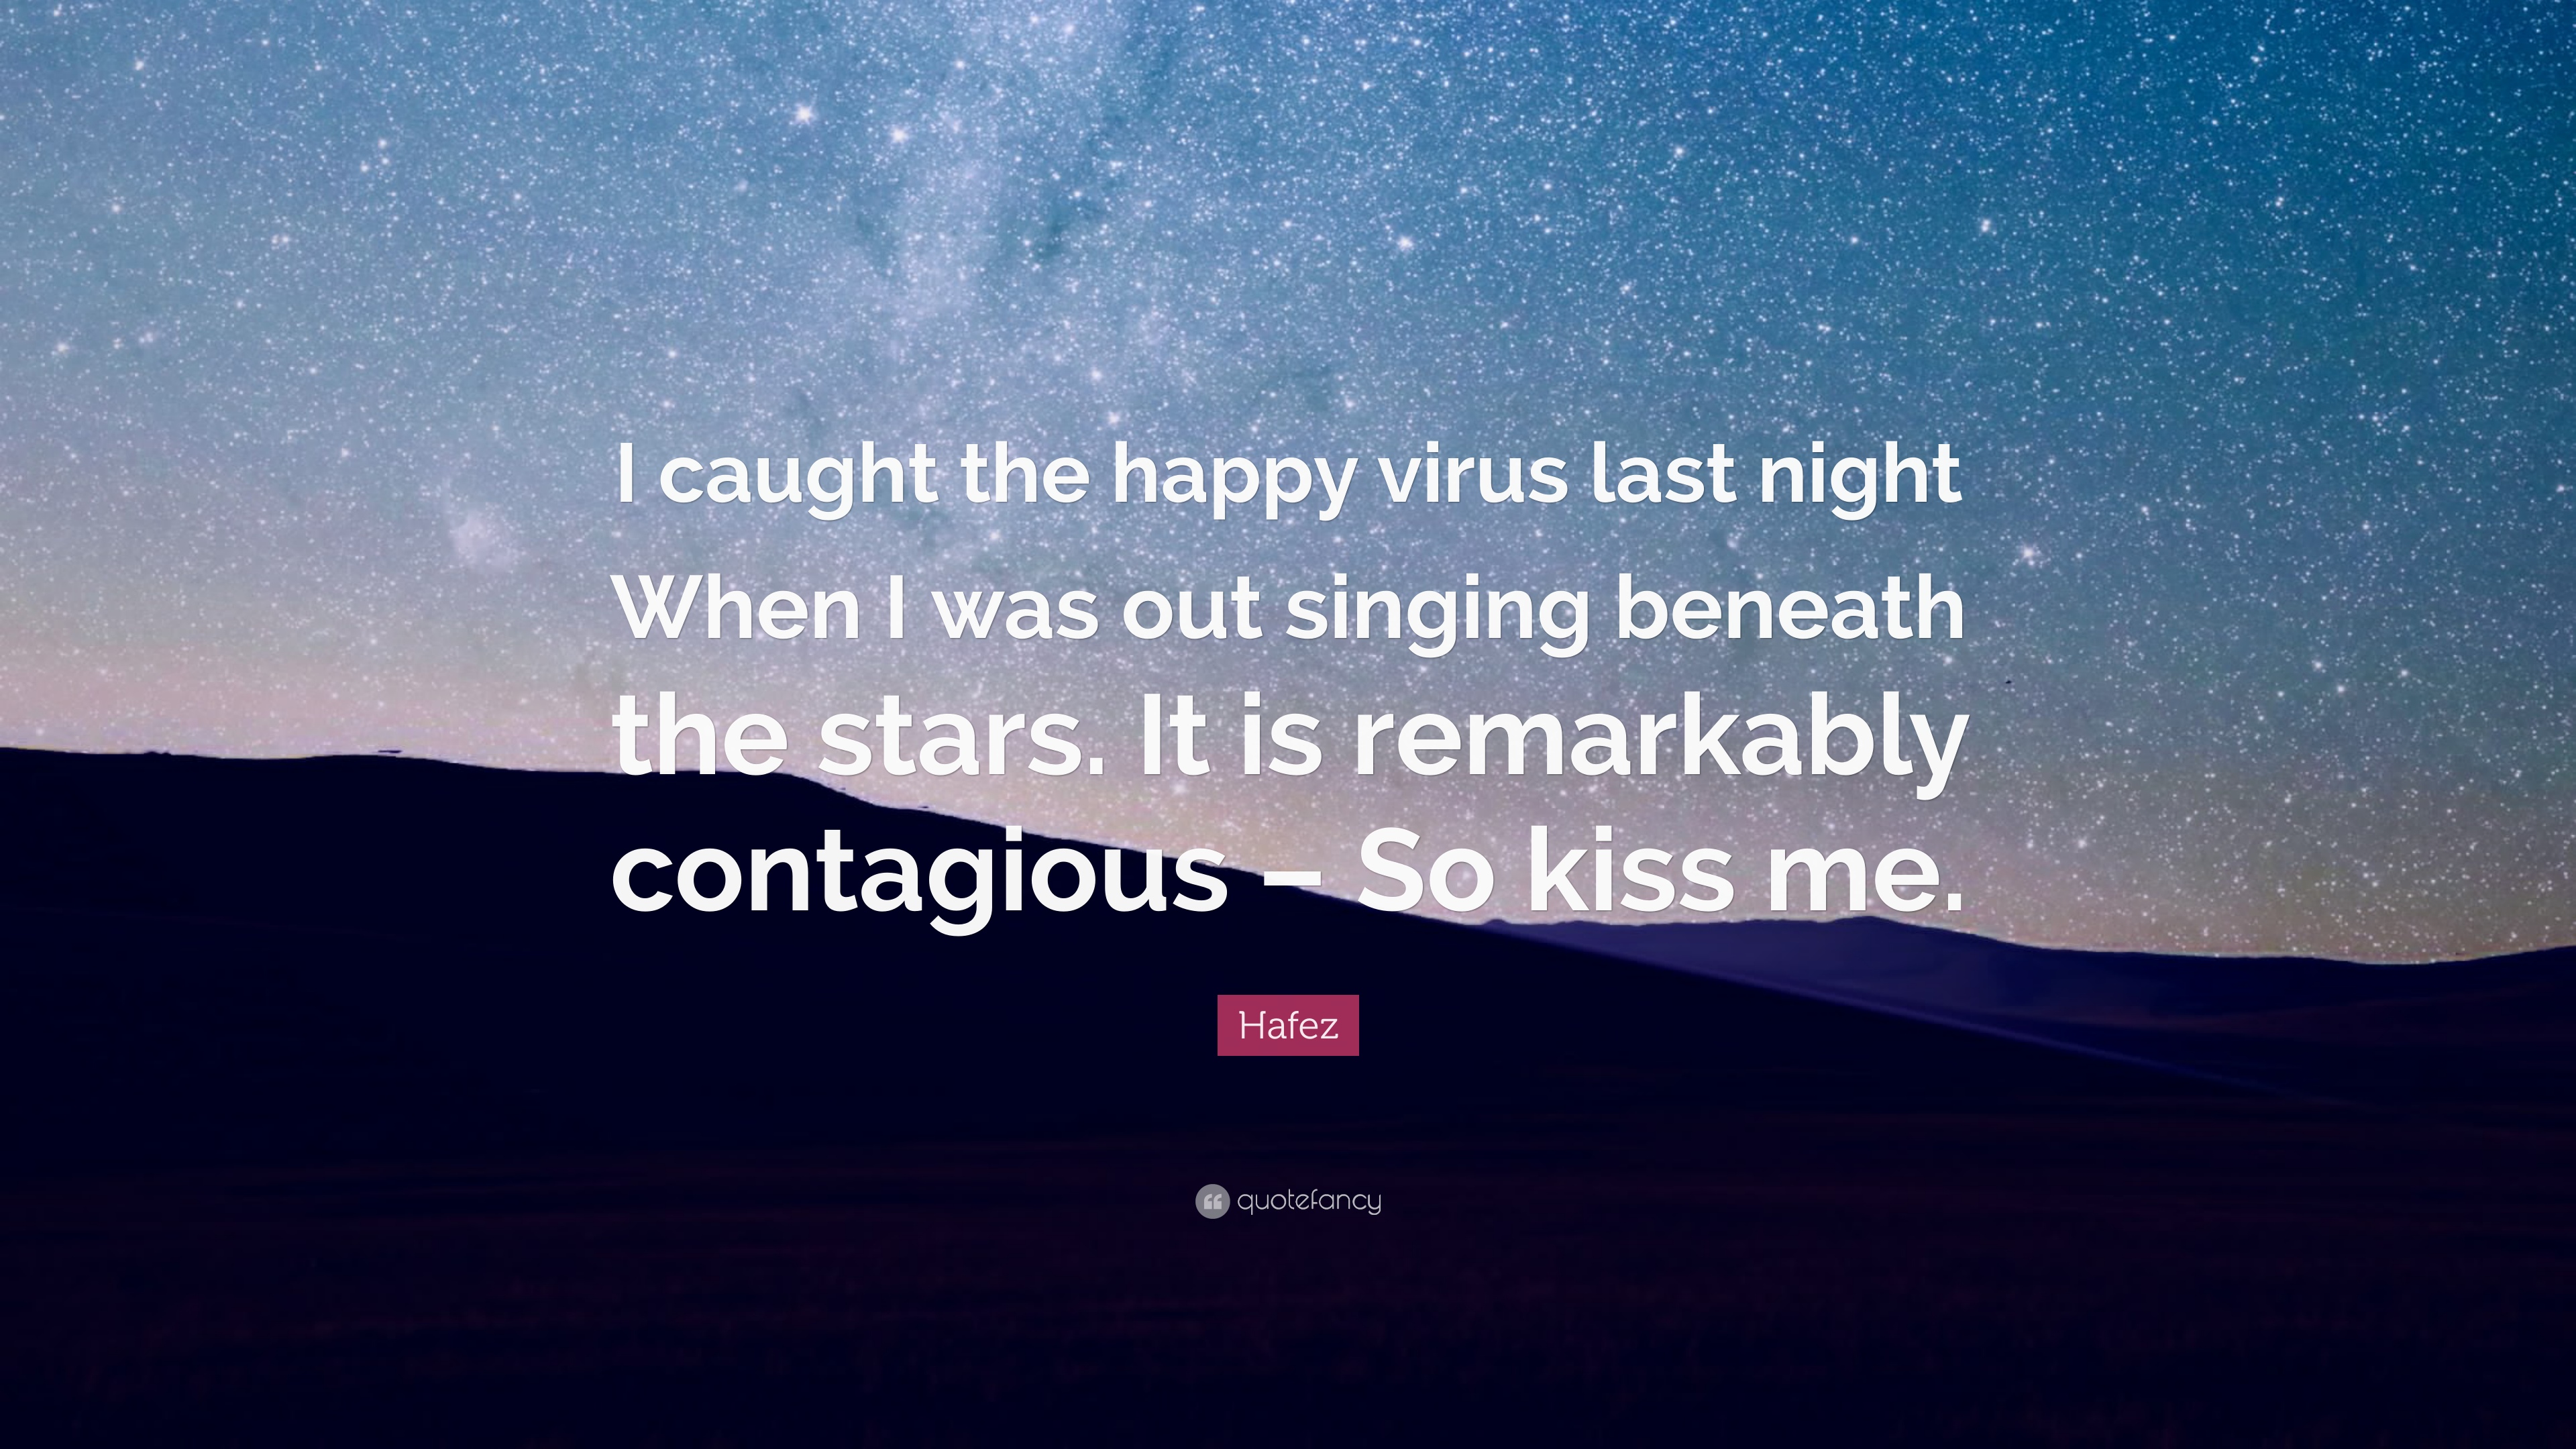 Hafez Quote: “I caught the happy virus last night When I was out singing beneath the